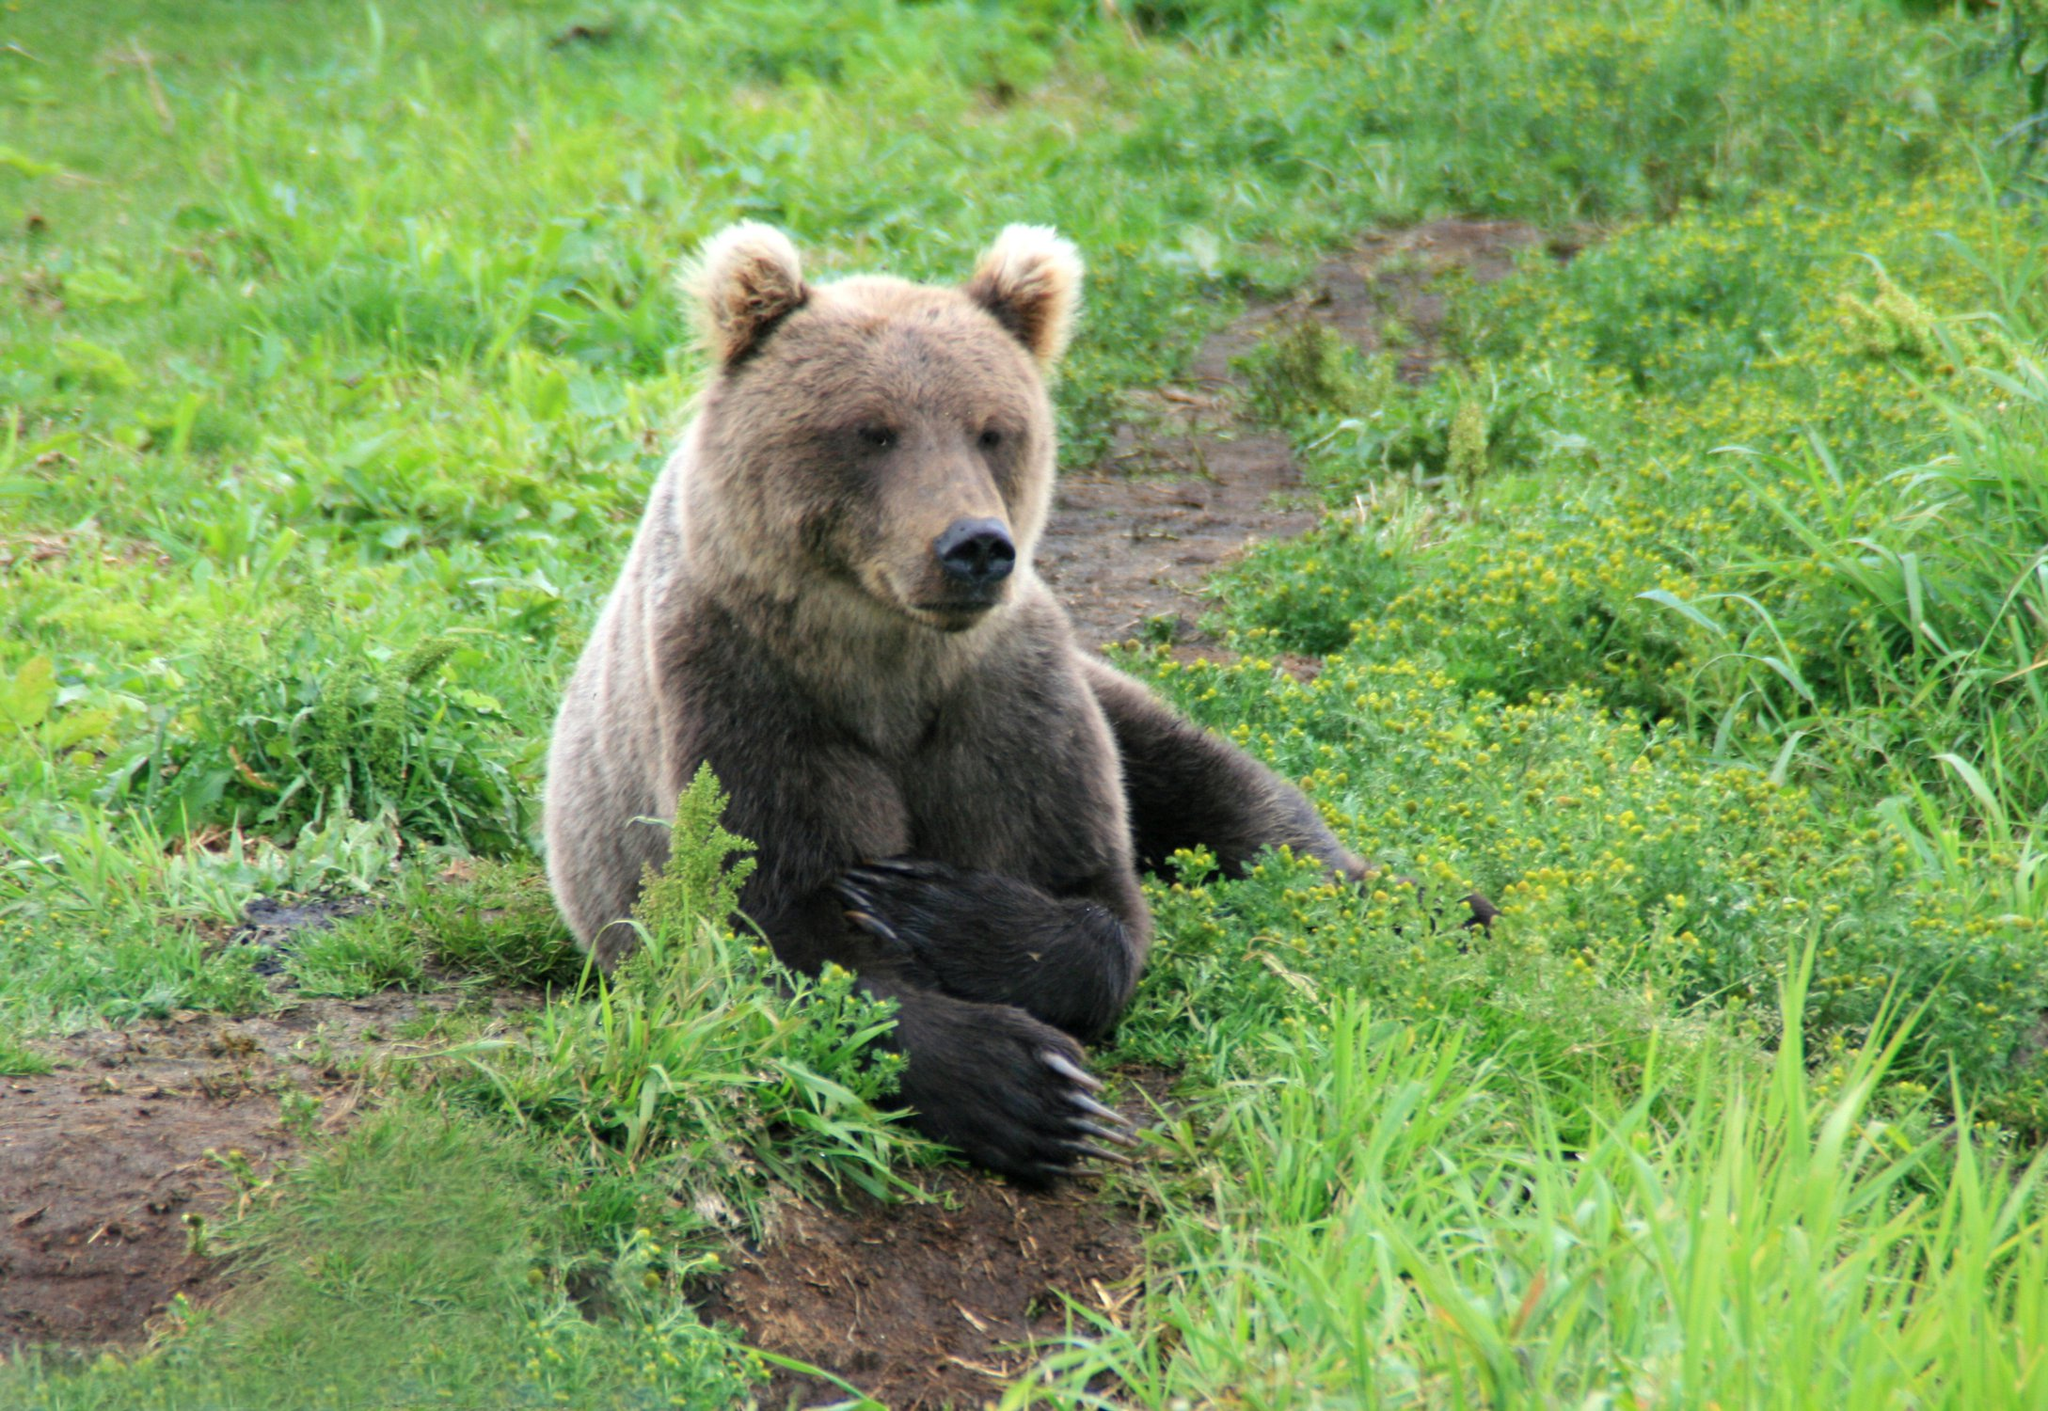 Family matters... - The Bears, Brown bears, Teddy bears, Kamchatka, Kuril lake, Reserves and sanctuaries, The national geographic, The photo, Longpost